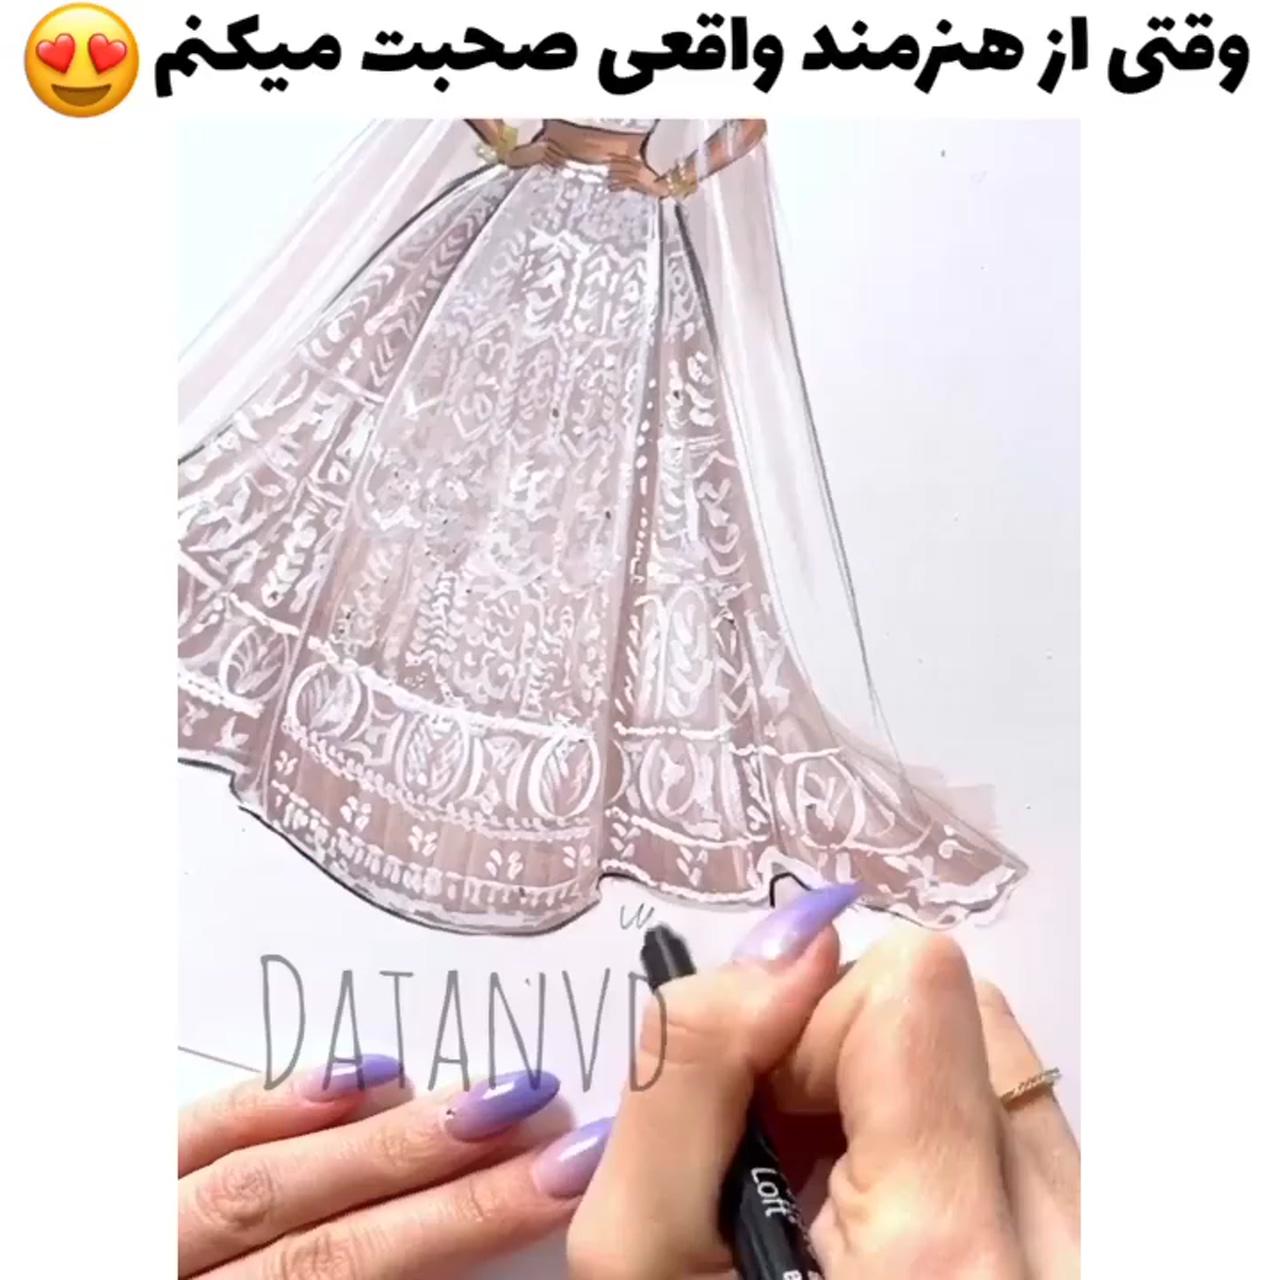 How beautiful it is | 5 minute crafts videos